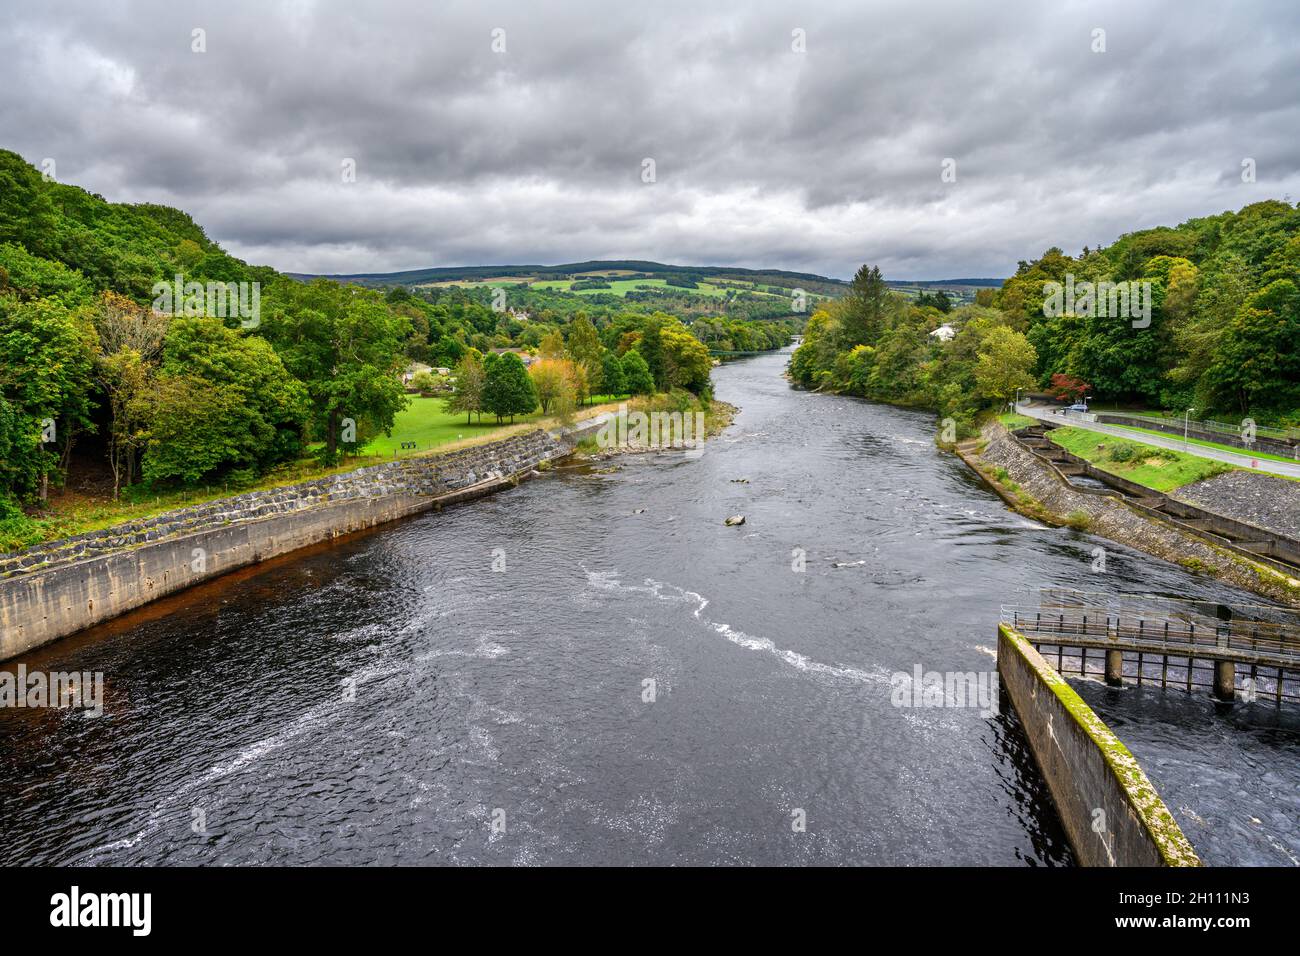 View of the River Trummel from Pitlochry Dam, Pitlochry, Scotland, UK Stock Photo